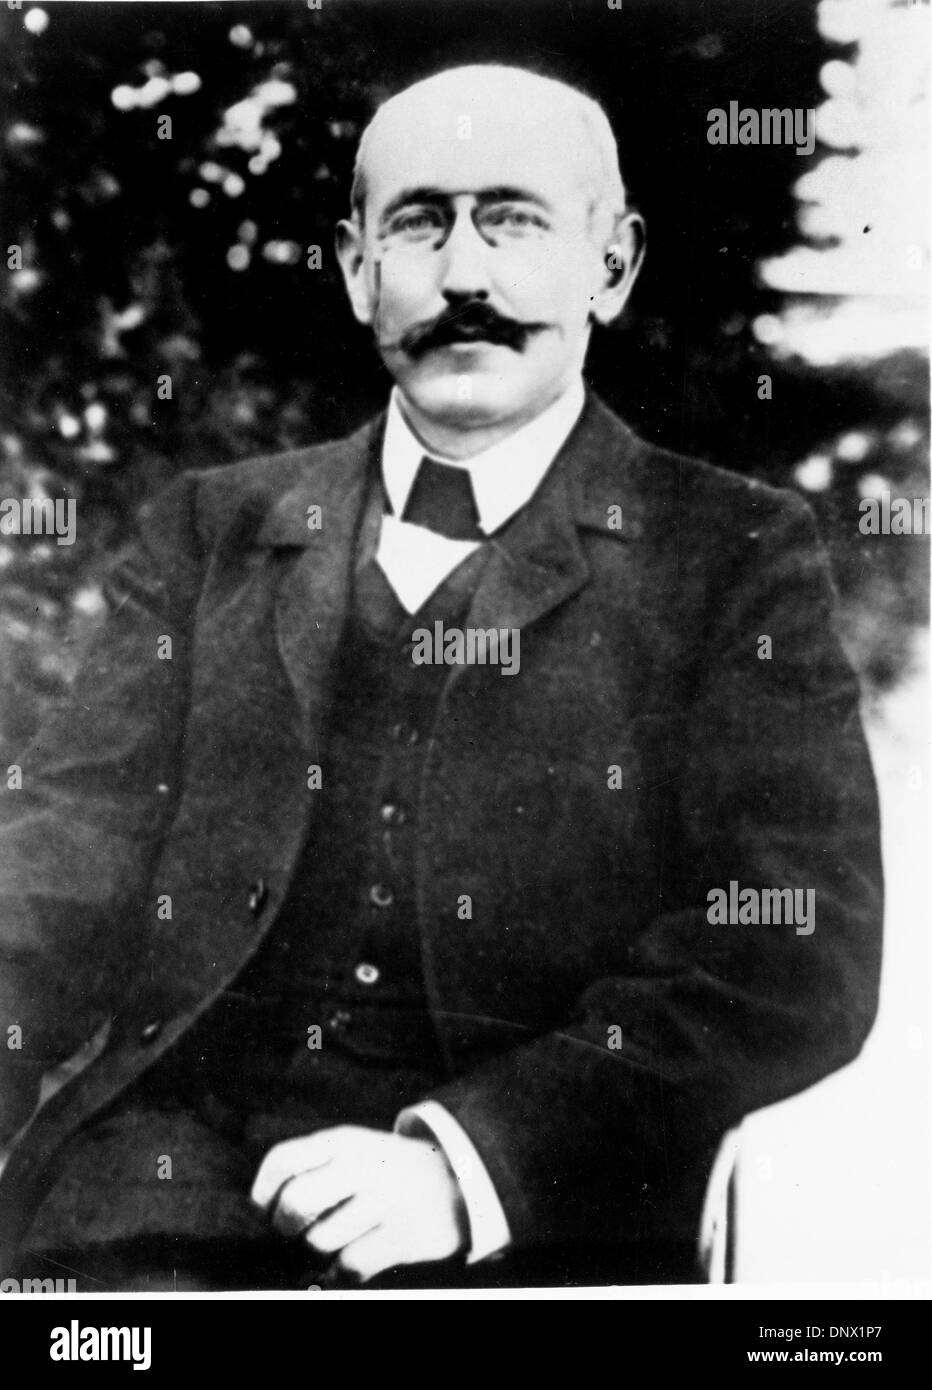 Feb. 14, 1930 - New York, NY, U.S. - COLONEL ALFRED DREYFUS (October 9, 1859-July 12, 1935) was a artillery officer whose trial and conviction in 1894 became one of the most tense political dramas in modern French and European history. (Credit Image: © KEYSTONE Pictures USA/ZUMAPRESS.com) Stock Photo